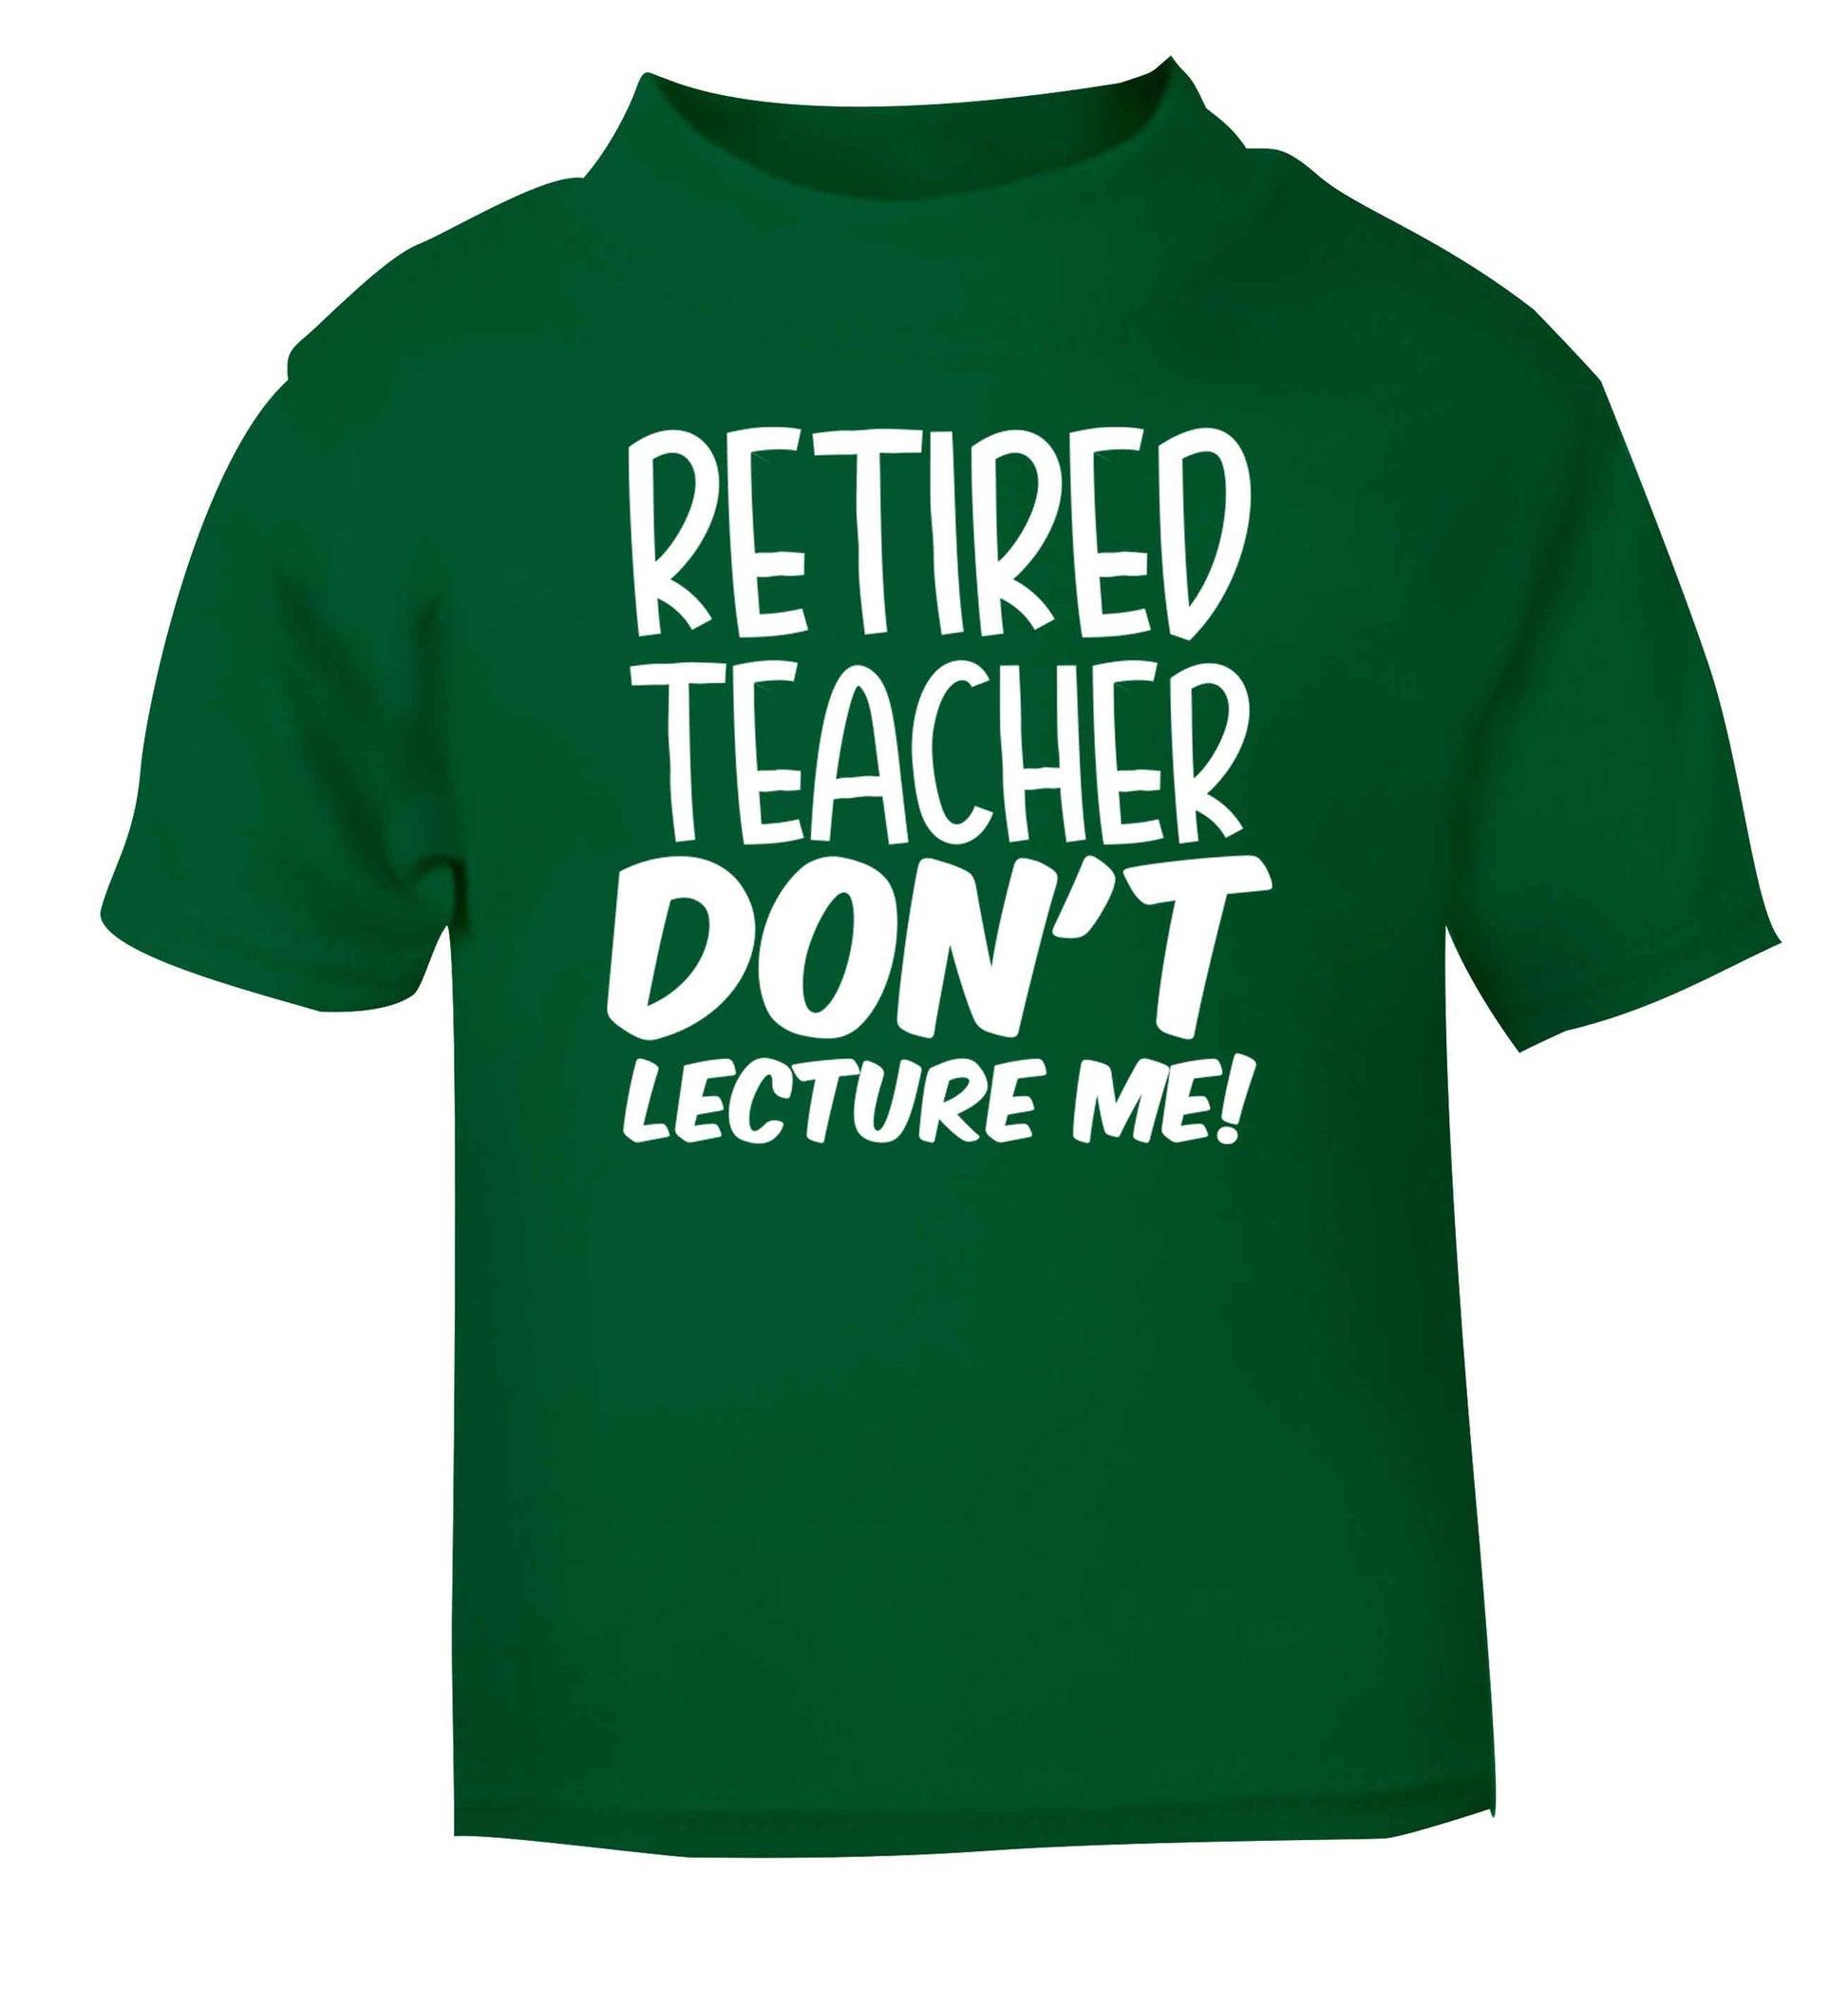 Retired teacher don't lecture me! green Baby Toddler Tshirt 2 Years